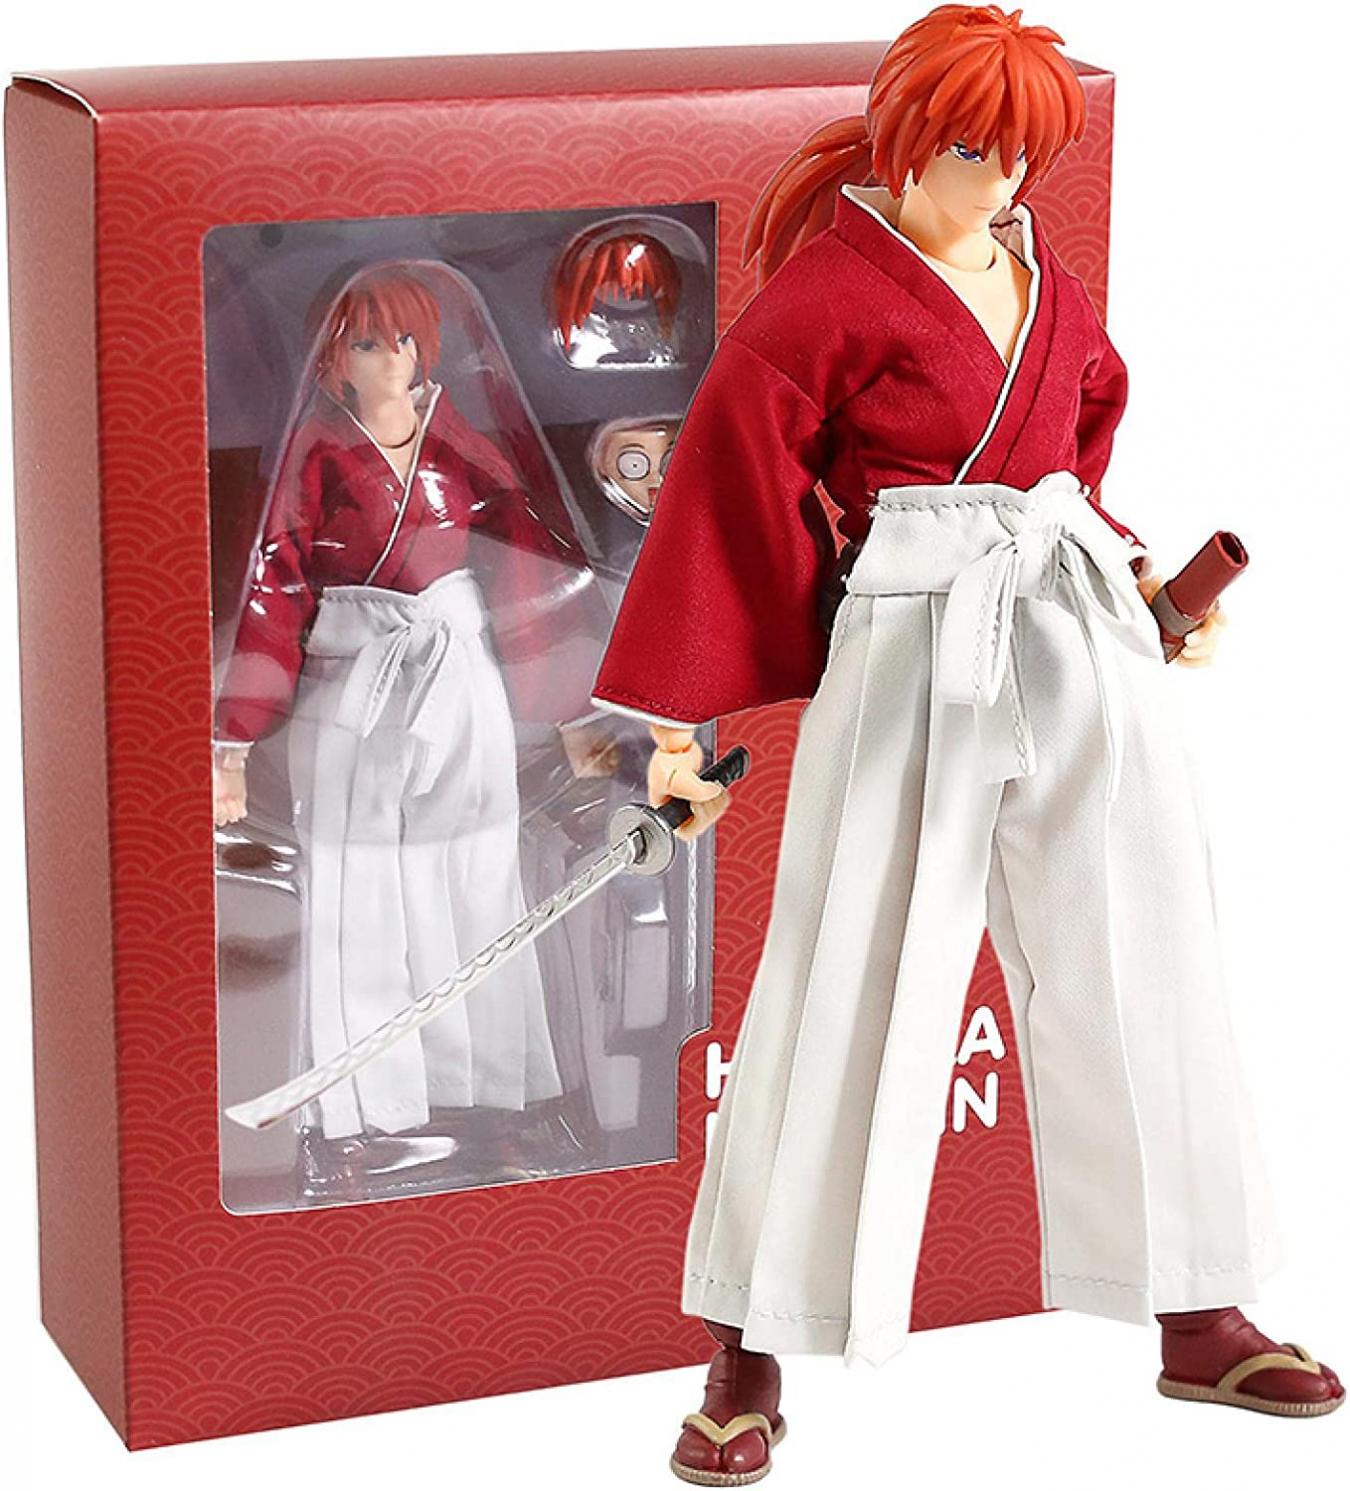 YLANTE 17 CM Dasin Model Rurouni Kenshin Himura PVC Action Figure Collectible Dolls Anime Figures Toy Gifts For Fans Kids Adult (Real Clothes) Red